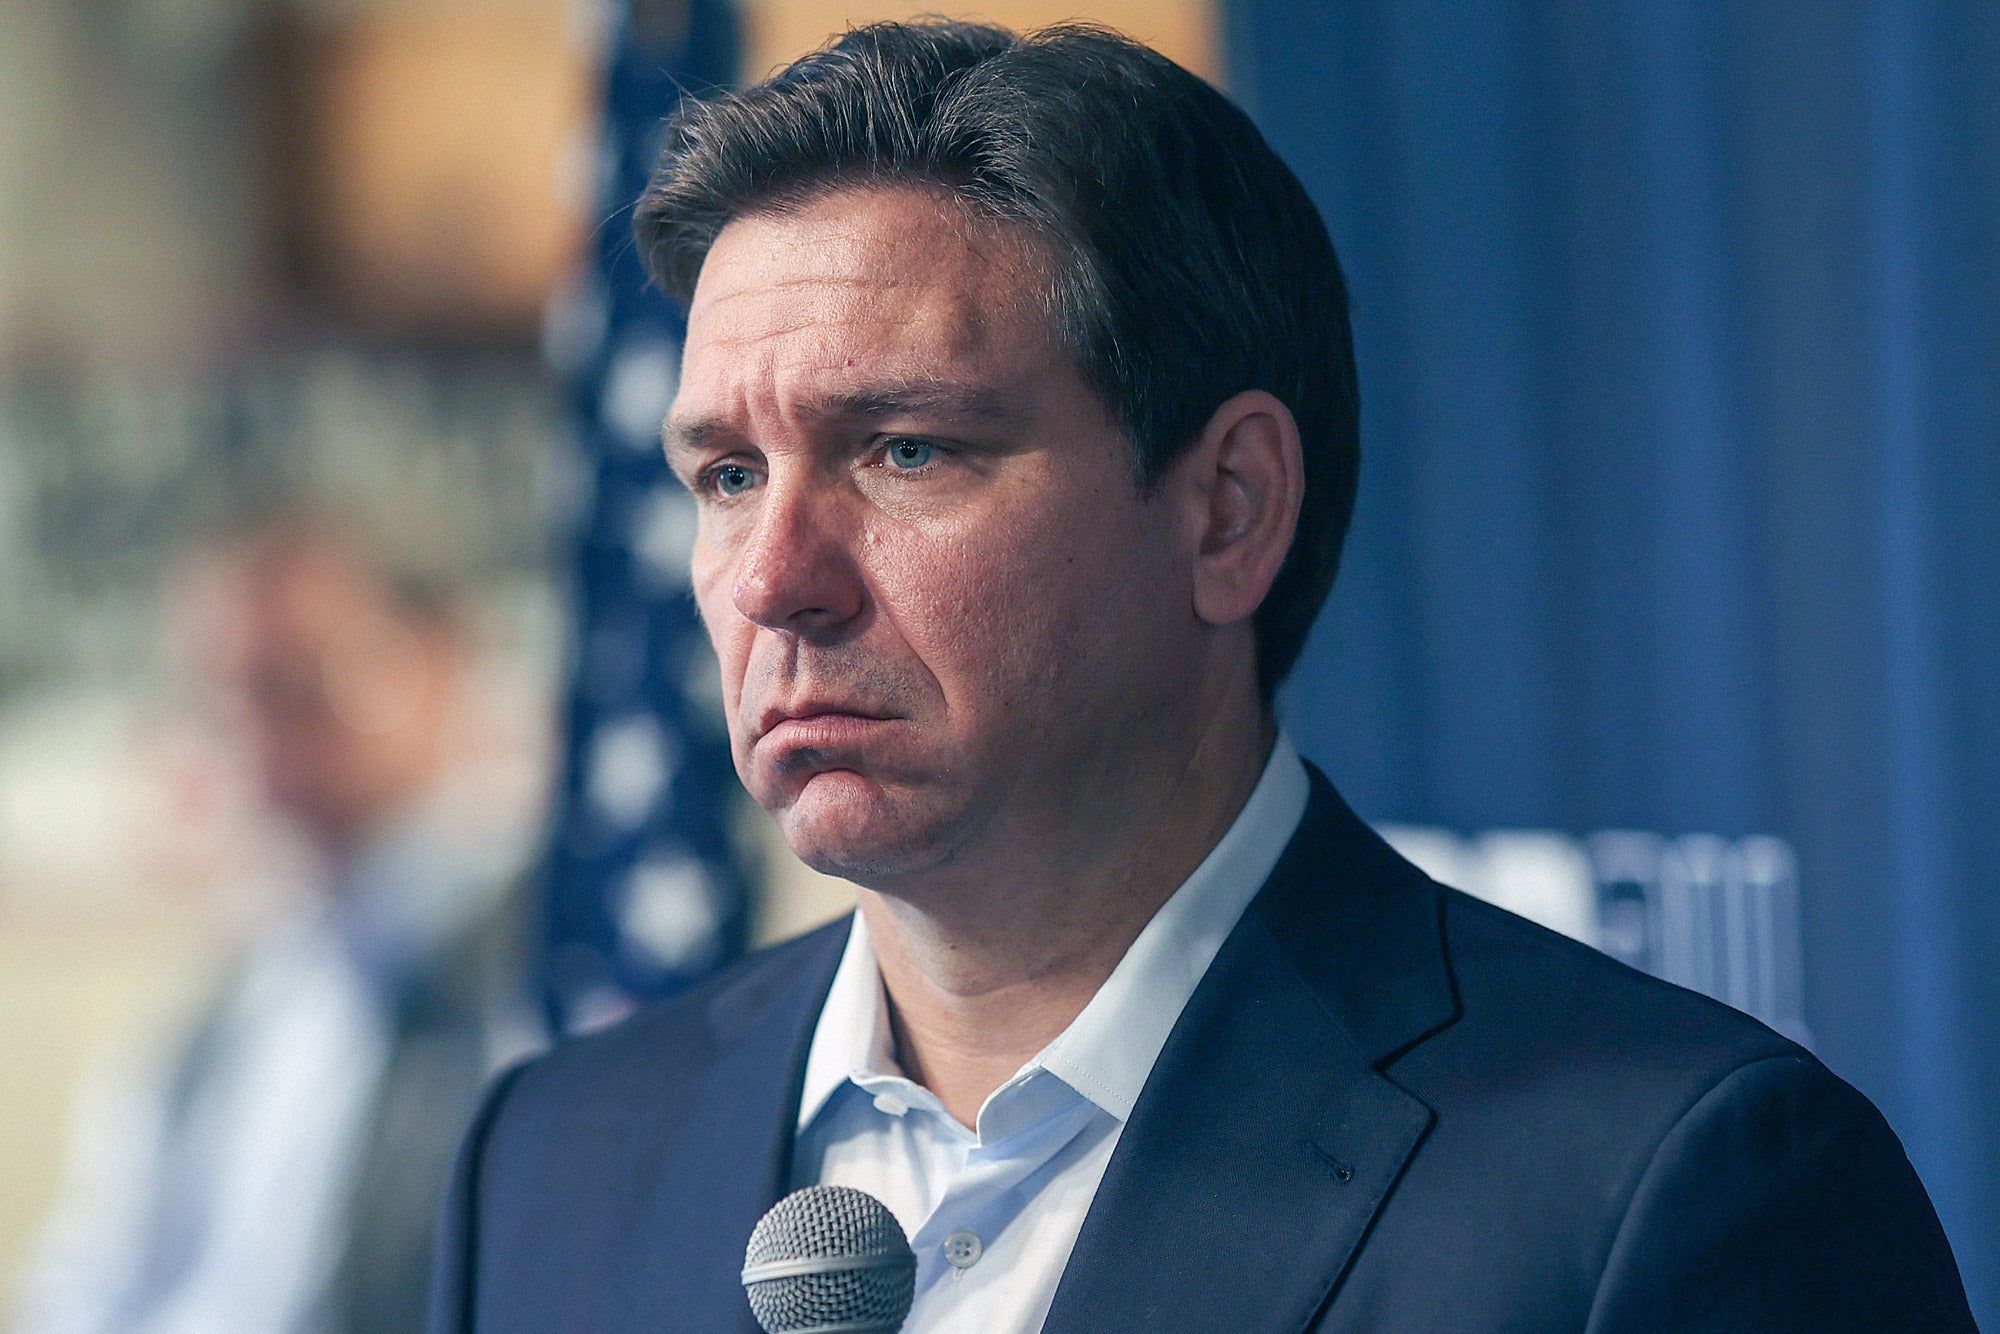 DeSantis frowning like a very sad sack with an unbuttoned collared shirt.